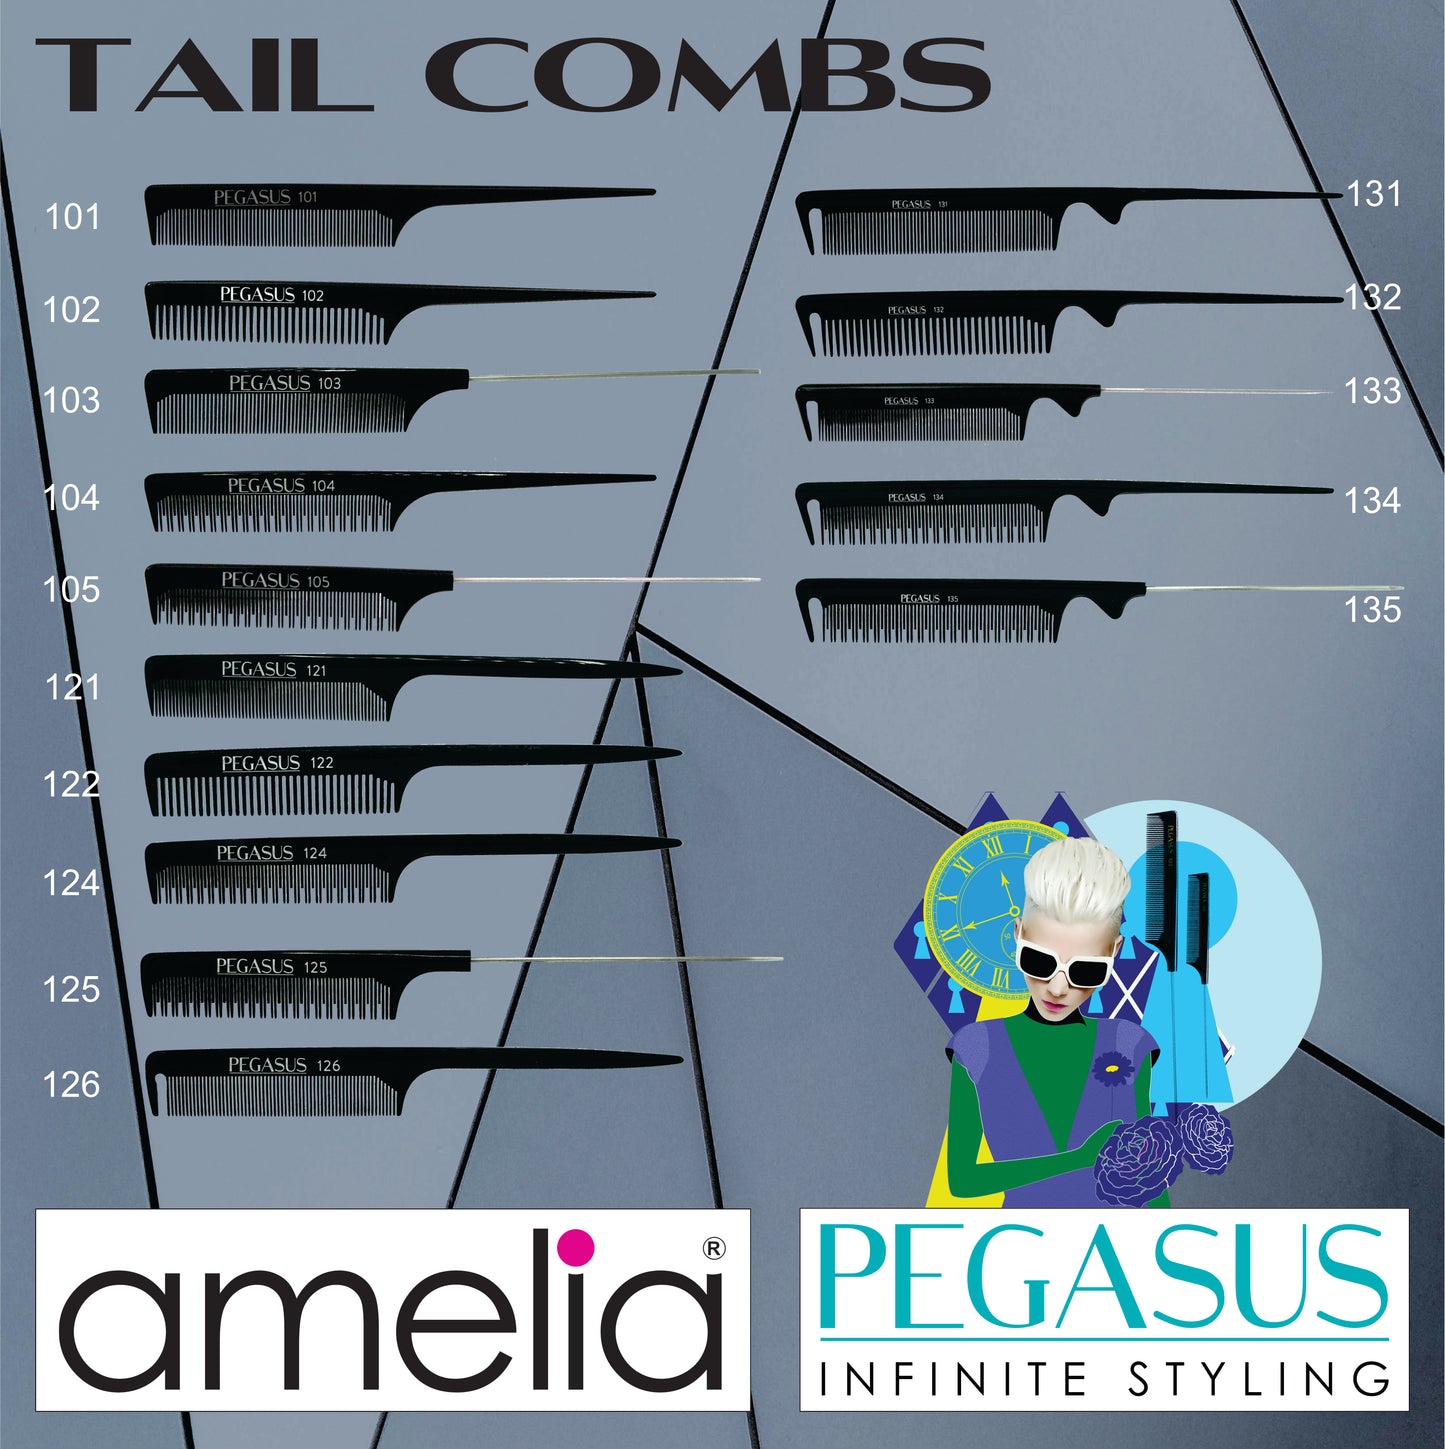 Pegasus 134, 8.5in Hard Rubber Rat Tail Tease Comb with Sectioning, Seamless, Smooth Edges, Anti Static, Heat and Chemically Resistant, Great for Parting, Coloring Hair | Peines de goma dura - Black